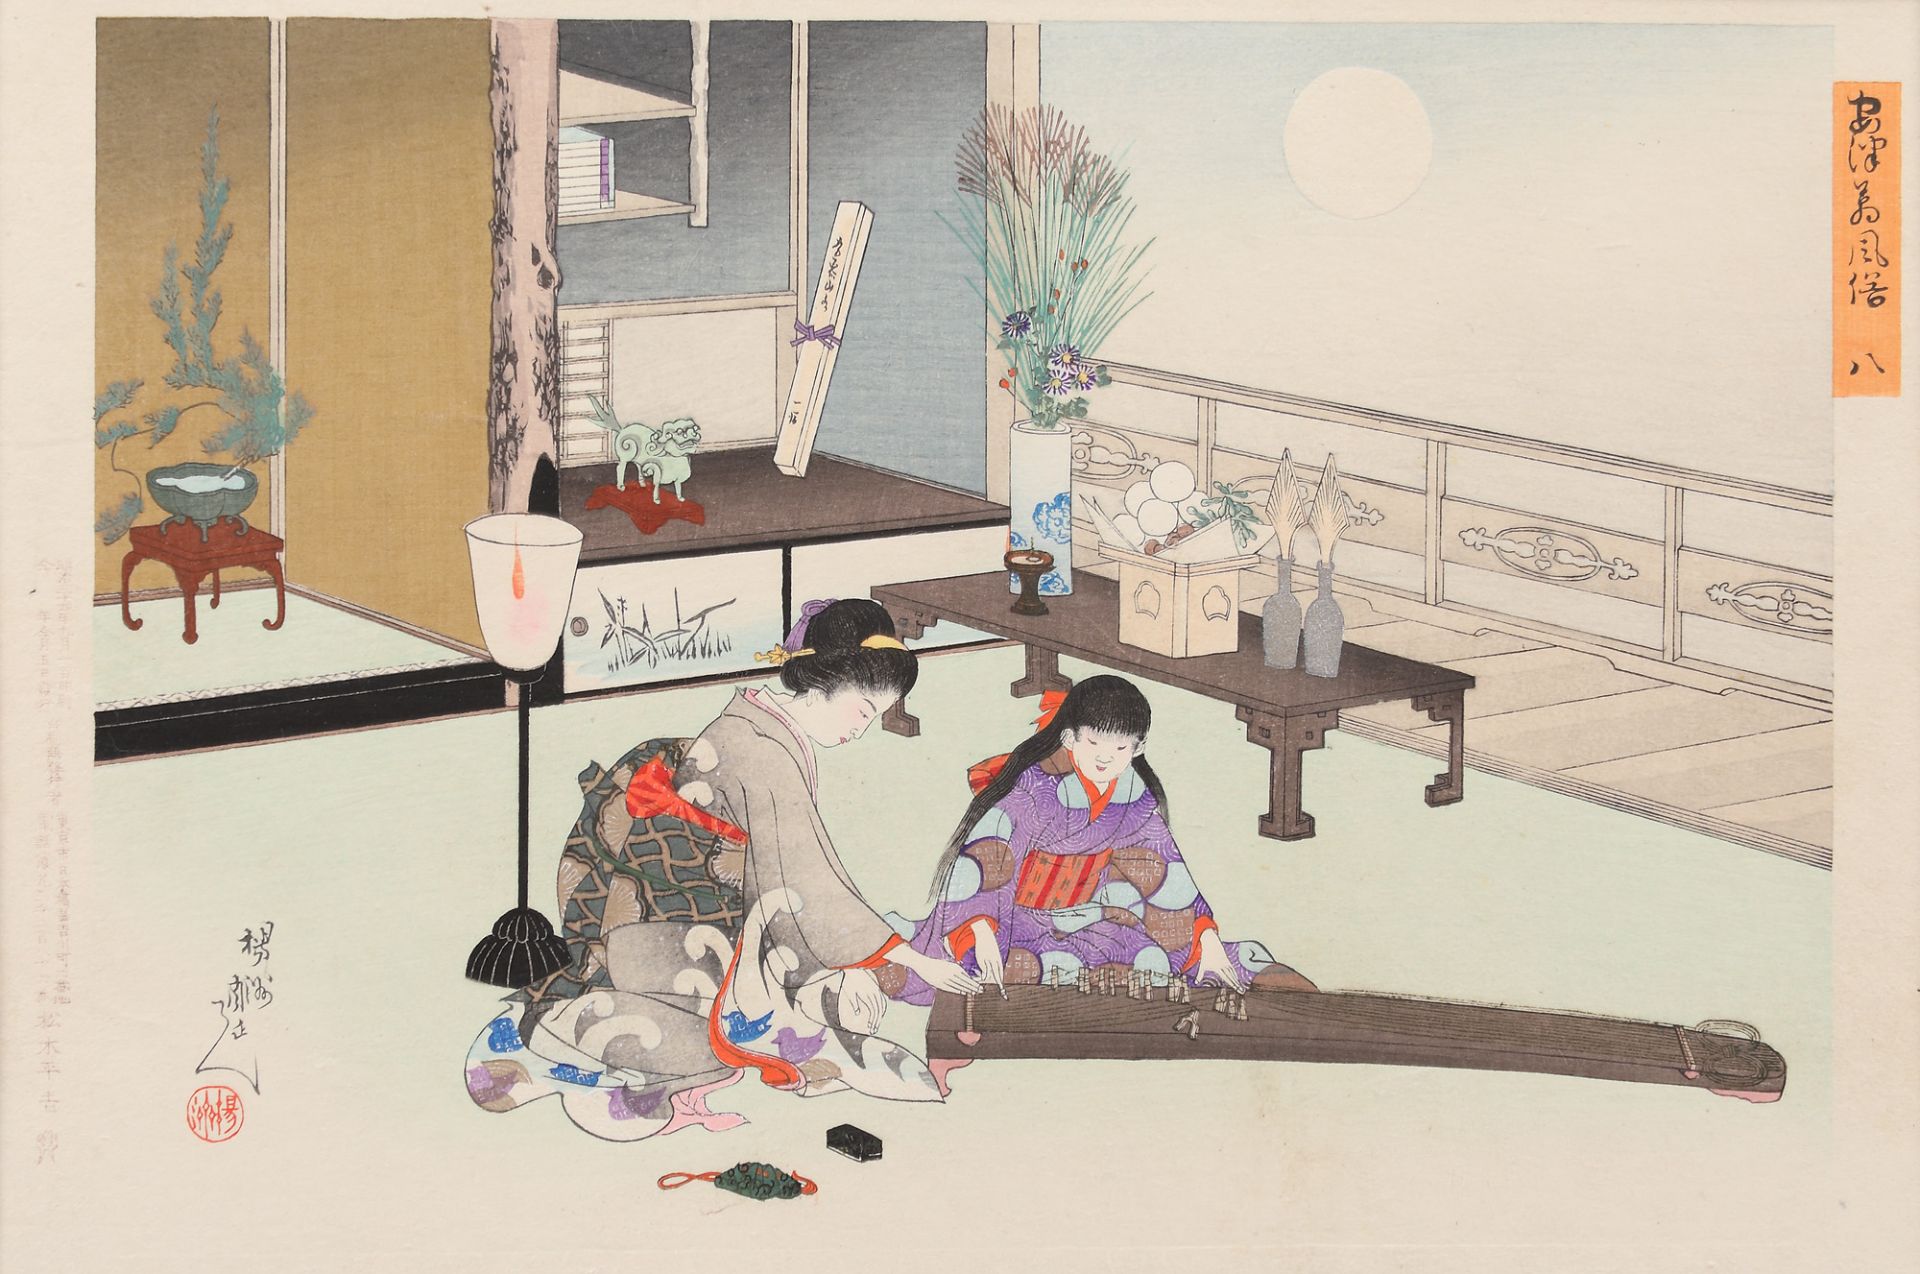 Toyohara Chikanobu, Koto playing lesson, from the series "Customs (of the Capital) from the East" (A